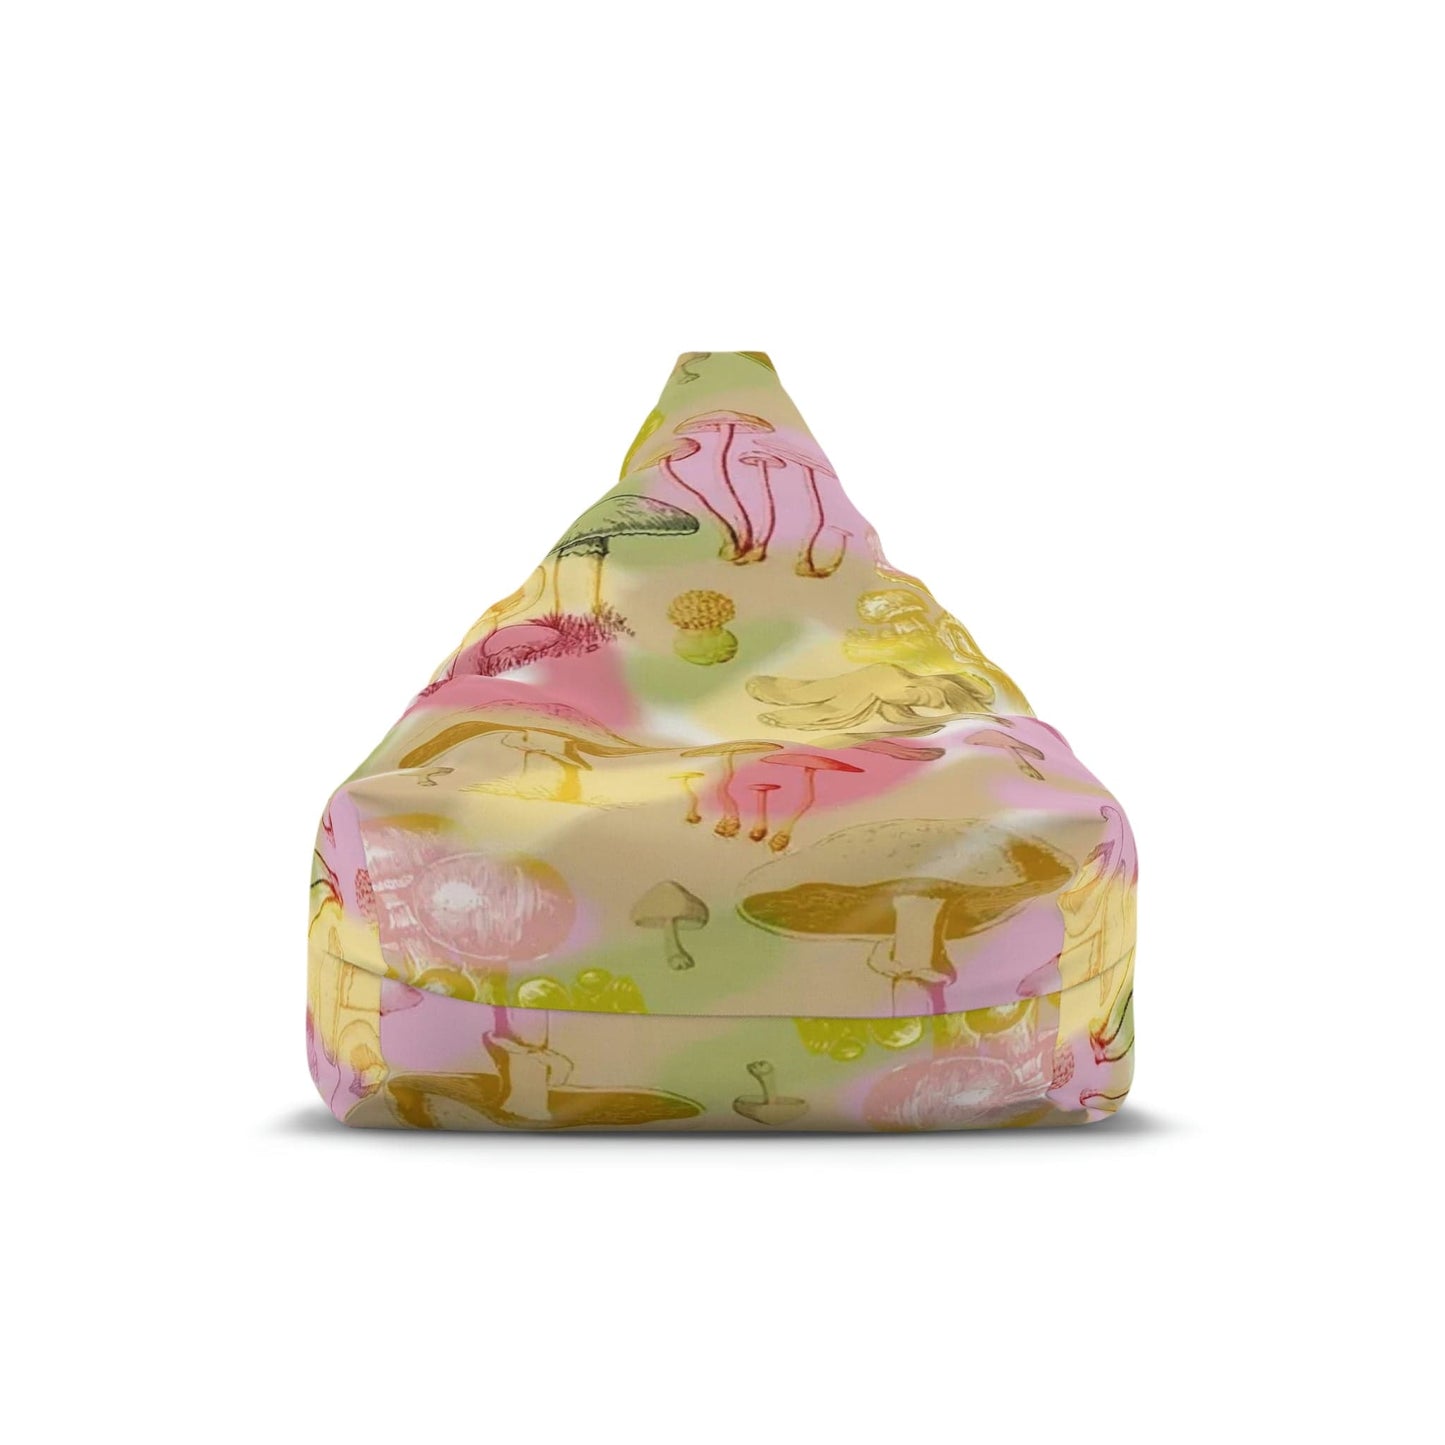 Kate McEnroe New York Mushroom in Pink and Yellow Bean Bag Chair Cover Bean Bag Chair Covers 27" × 30" × 25" / Without insert 11994195477840582544